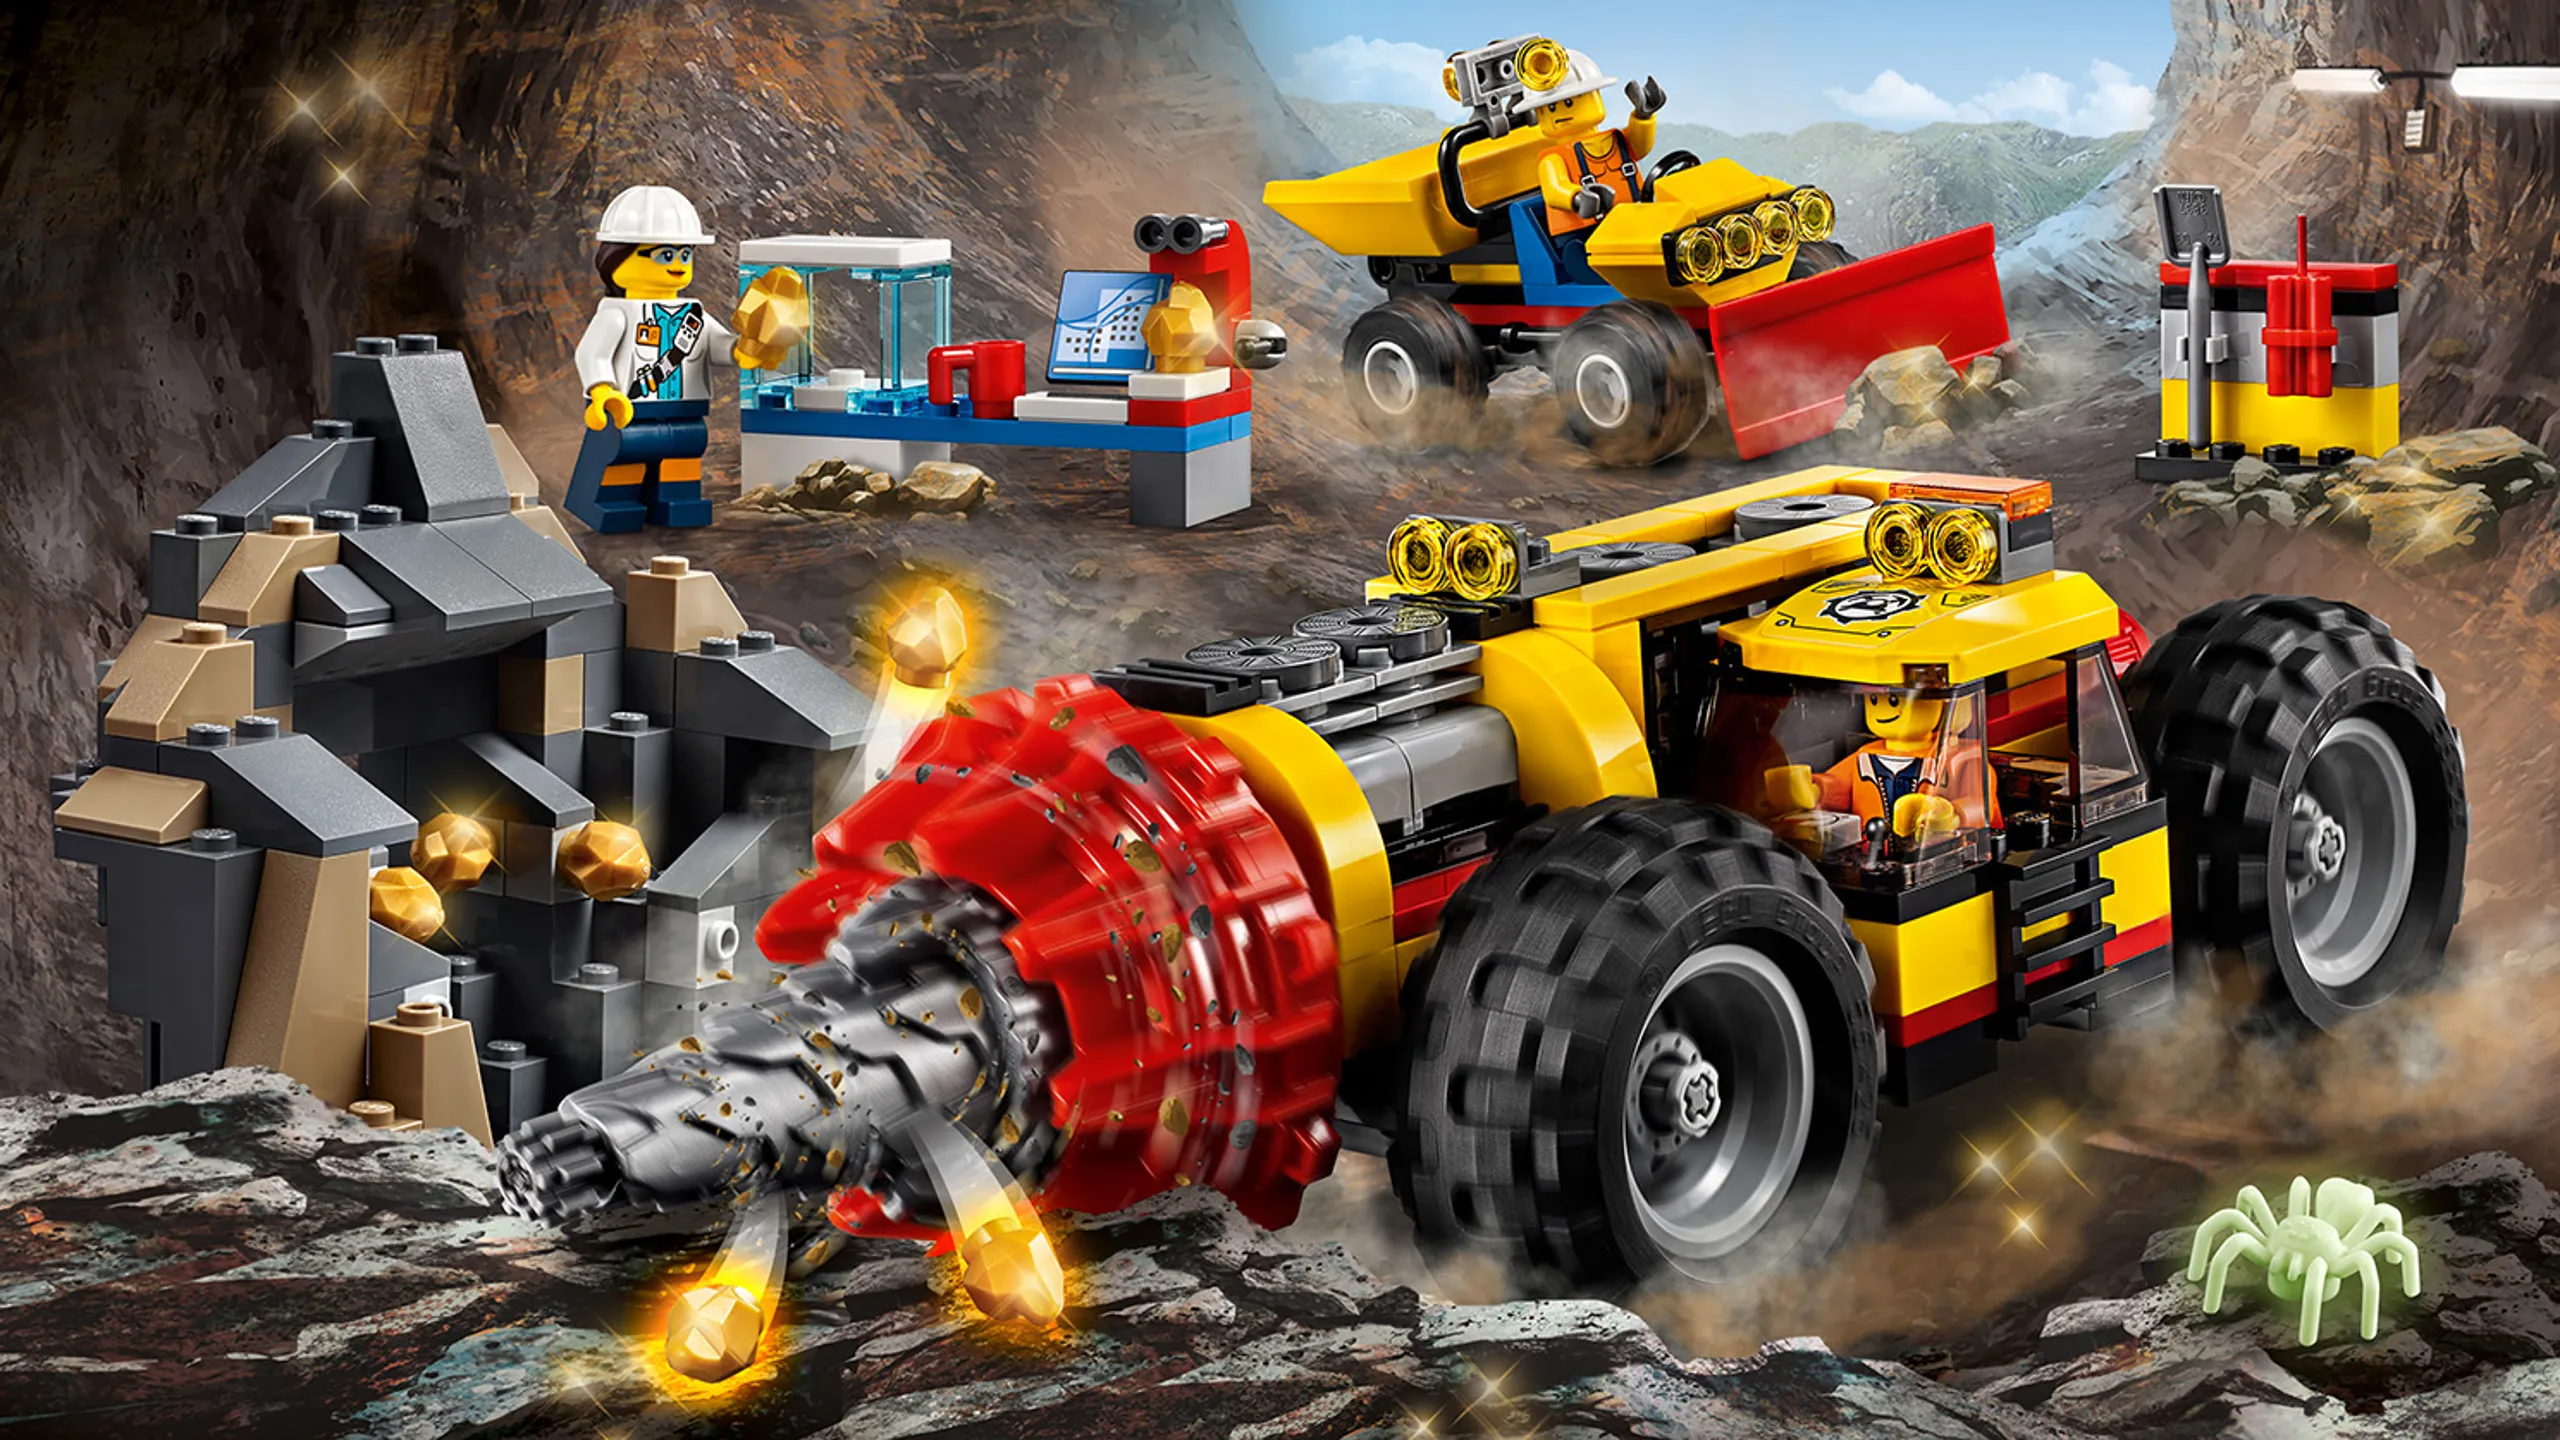 LEGO City Mining - 60186 Mining Heavy Driller - The drilling vehicle drills into a rock and discovers gold!